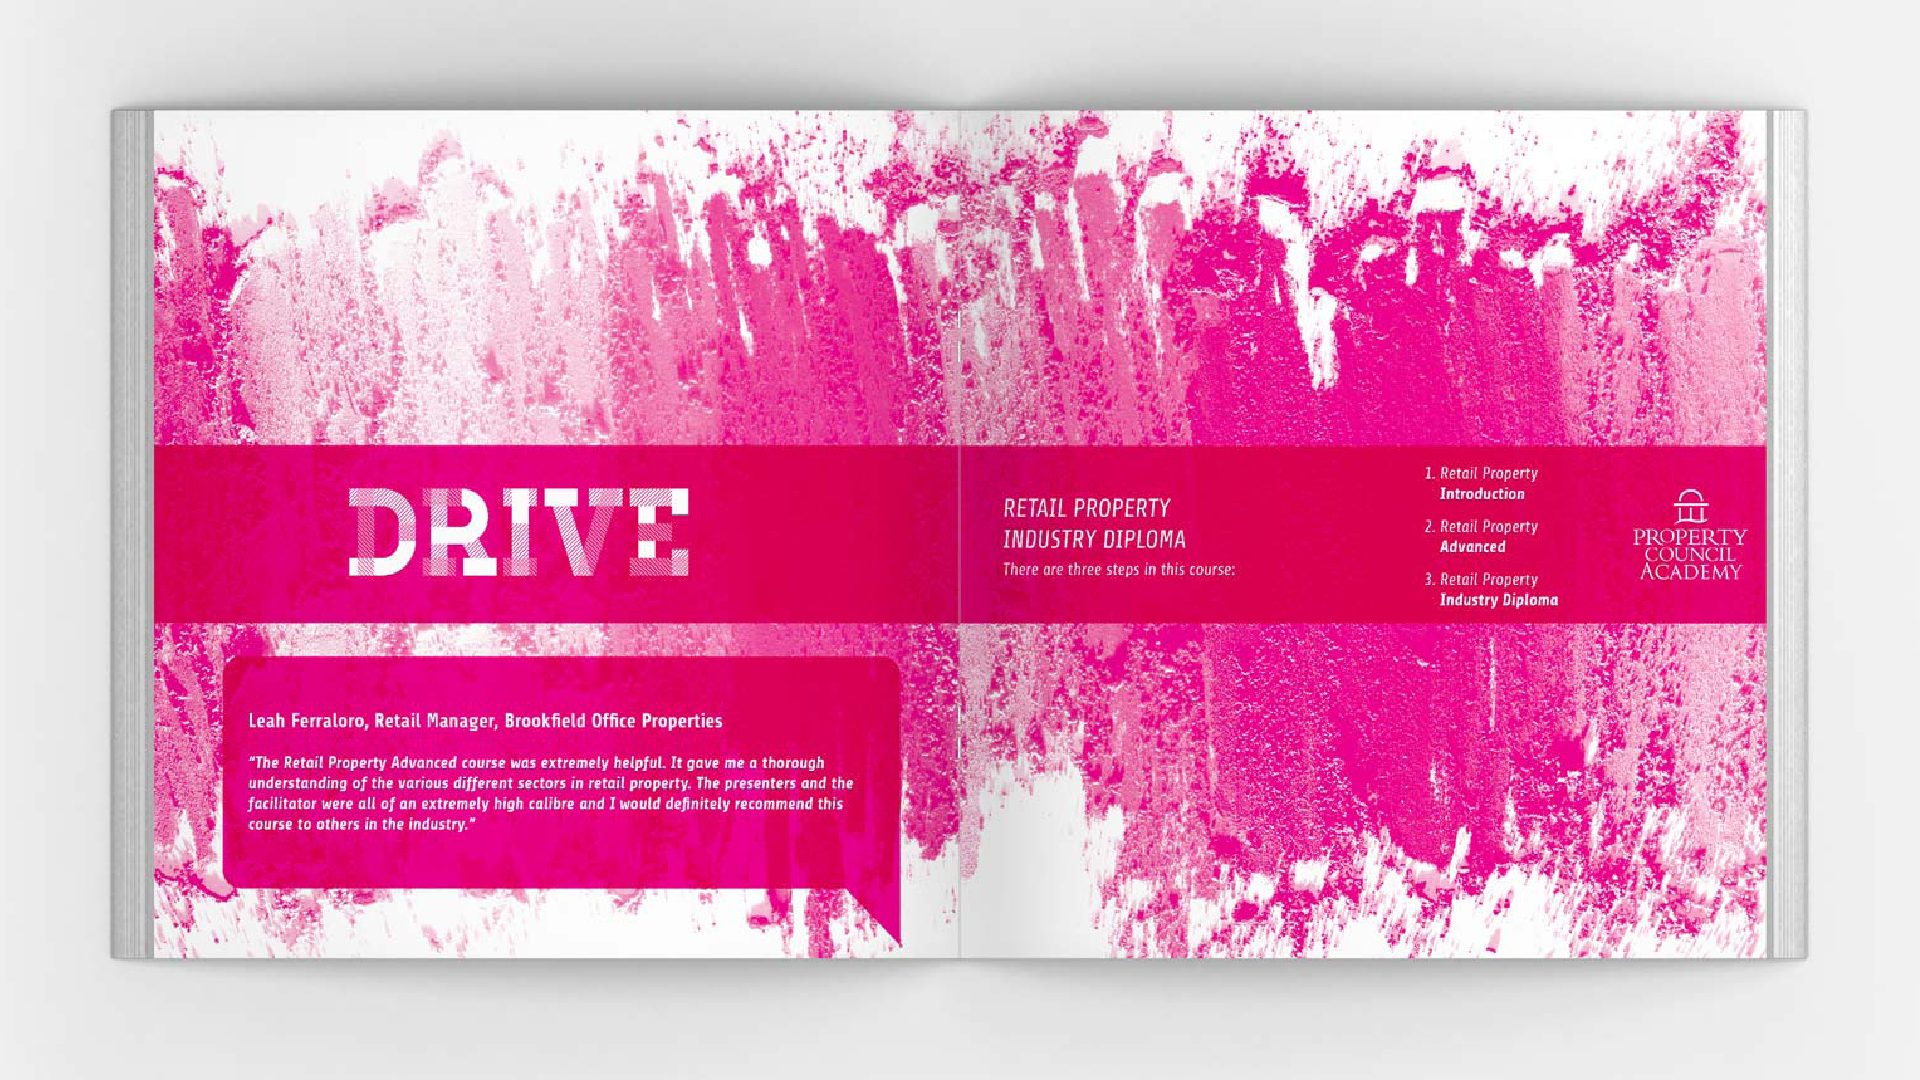 Property Council Academy 2014 Courses Collateral by Think Creative Agency11